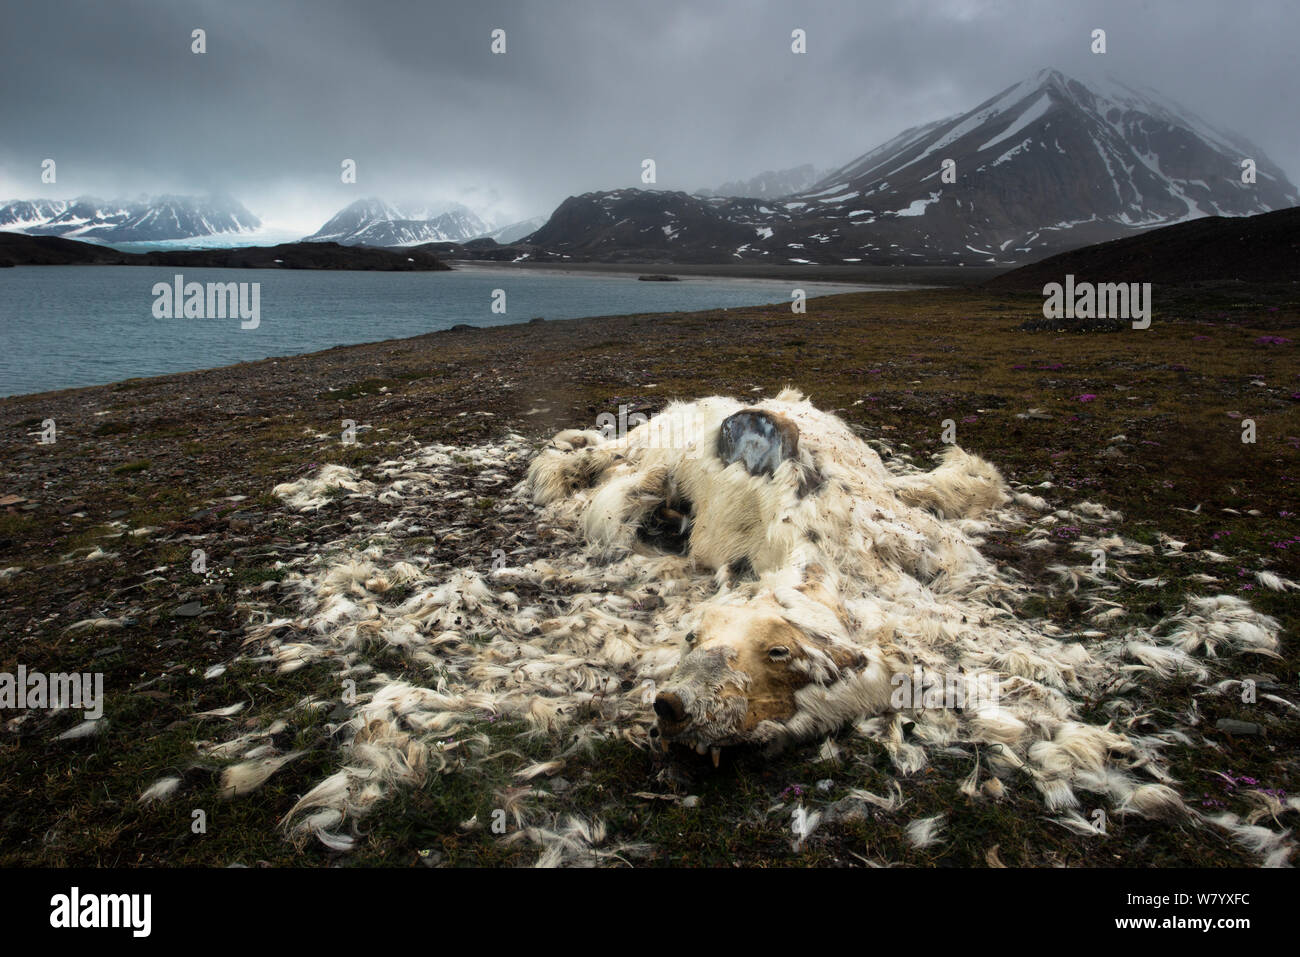 Dead Polar bear (Ursus maritimus) on shore of Liefdefjorden, partially decomposed with fur surrounding it. Svalbard, Norway Stock Photo